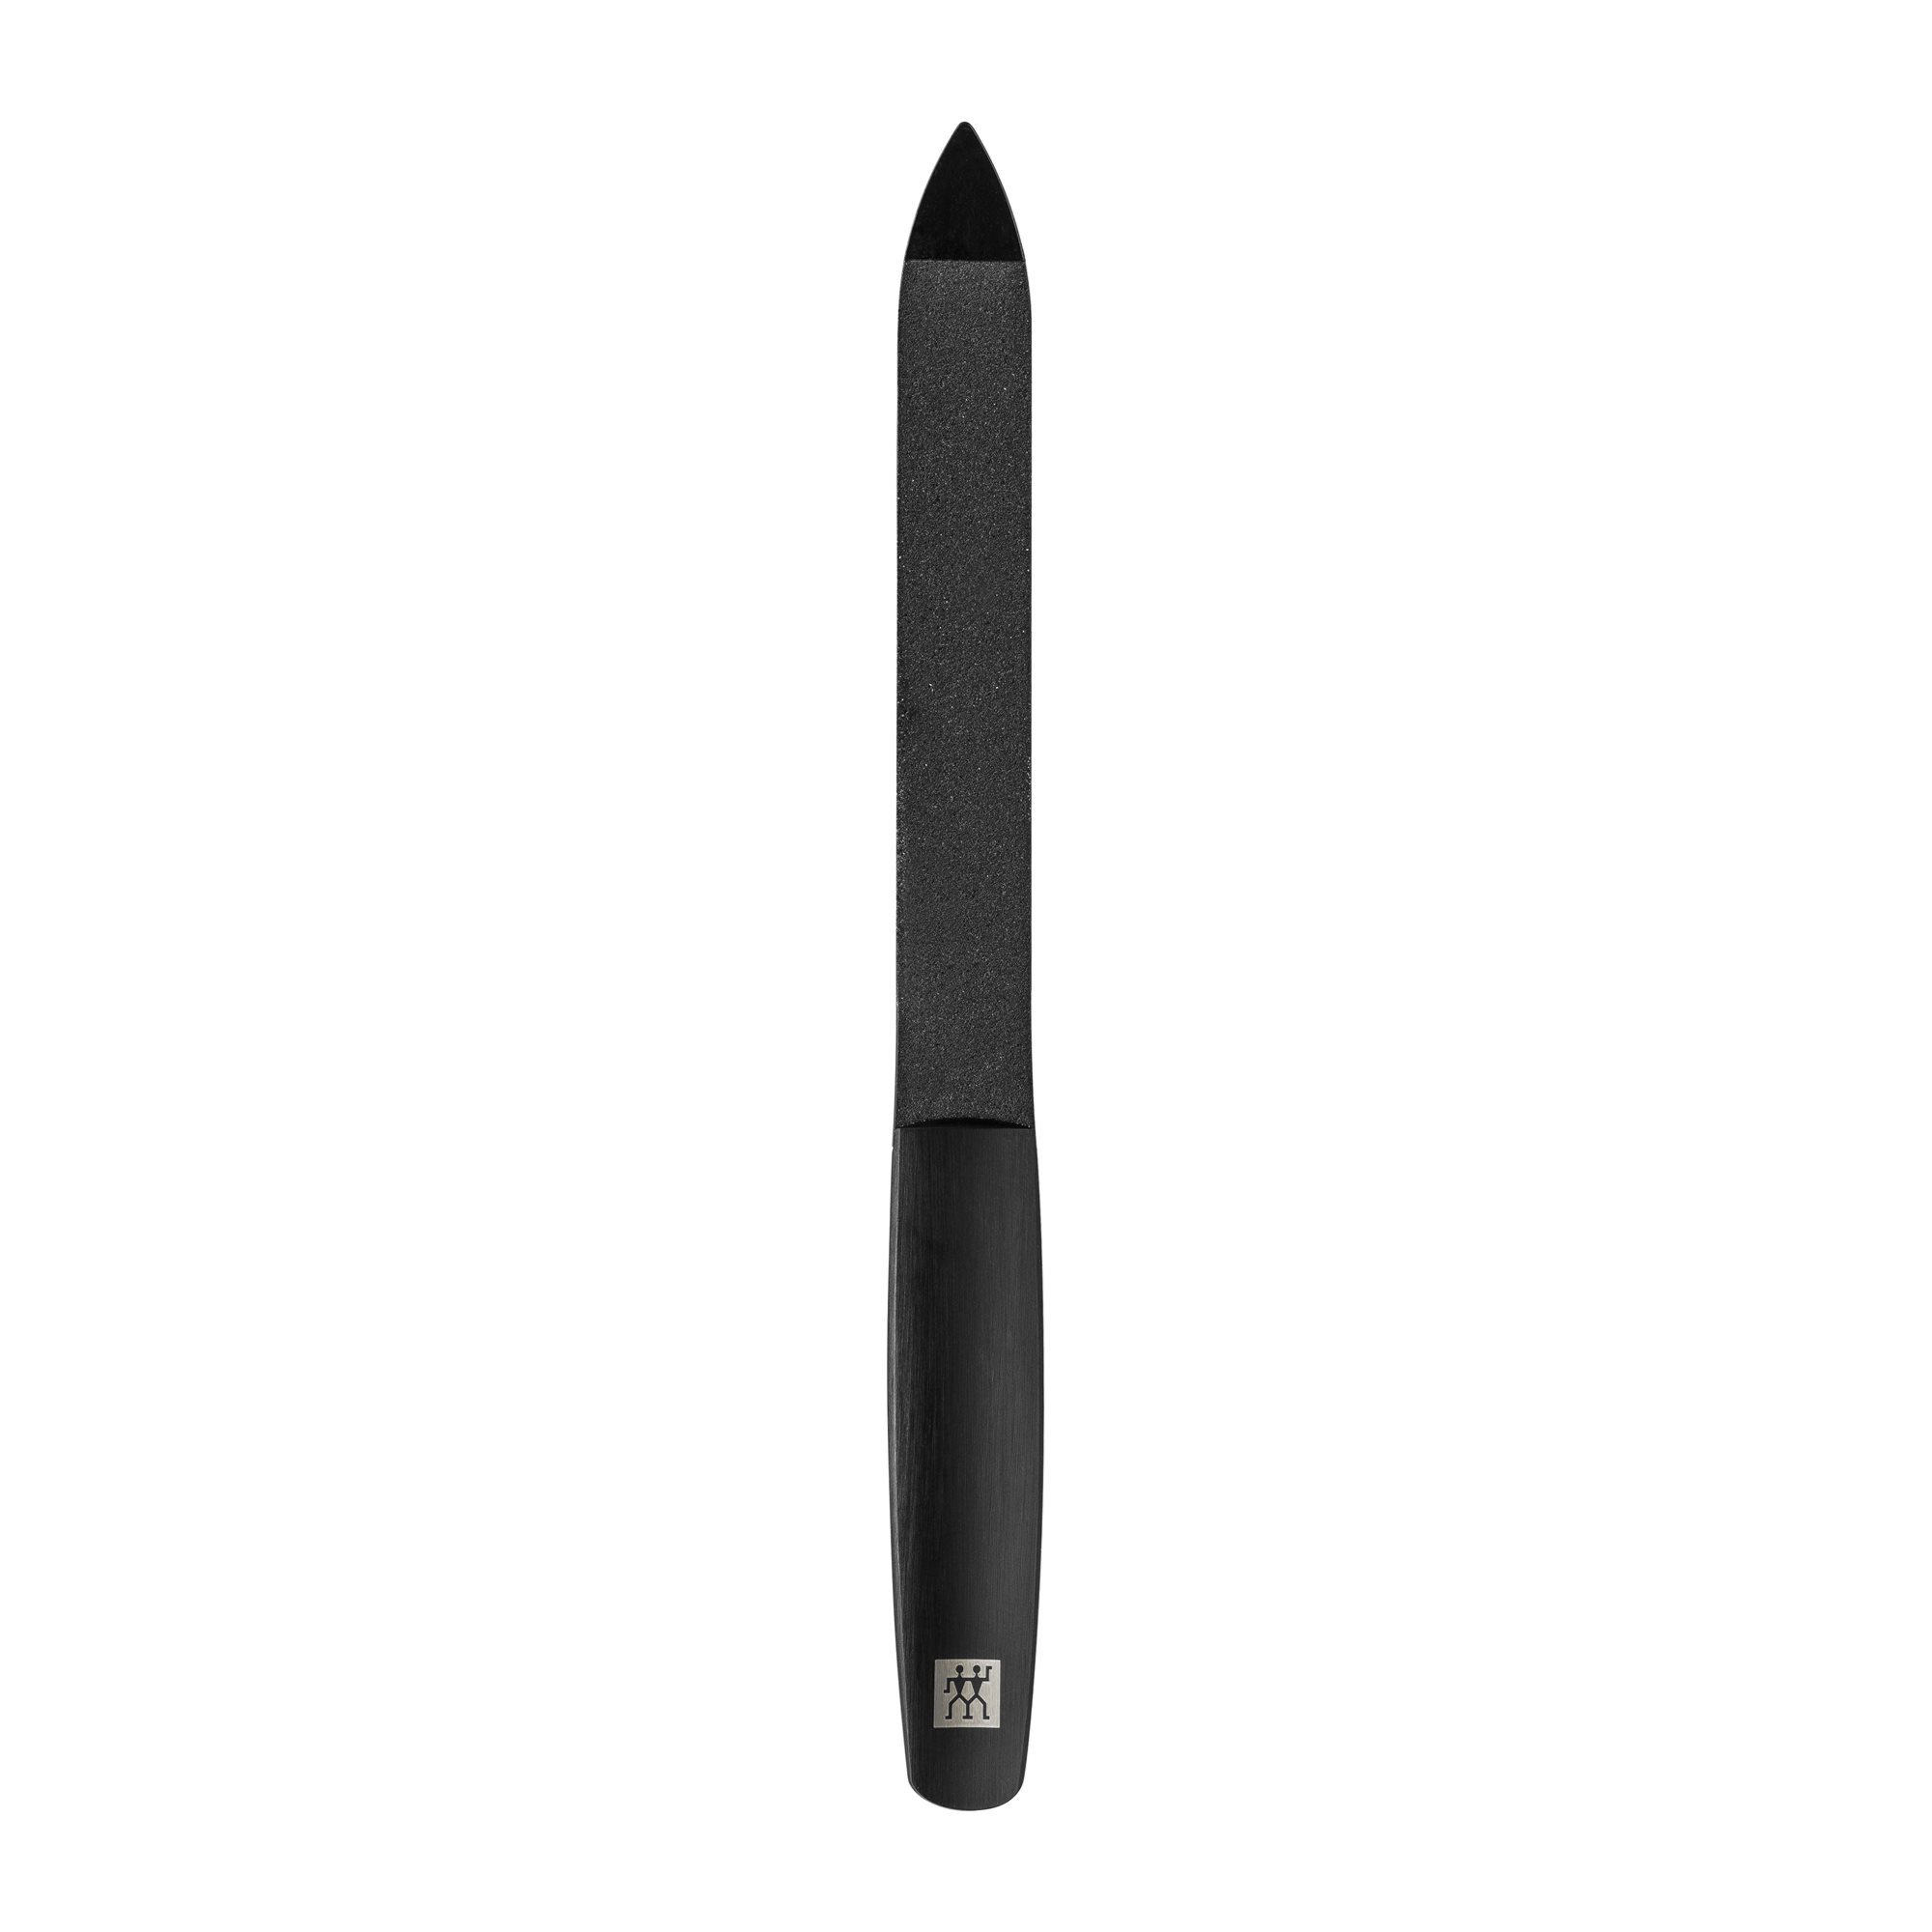 Nail file, stainless steel, 175 mm - Zwilling TWINOX M | KitchenShop